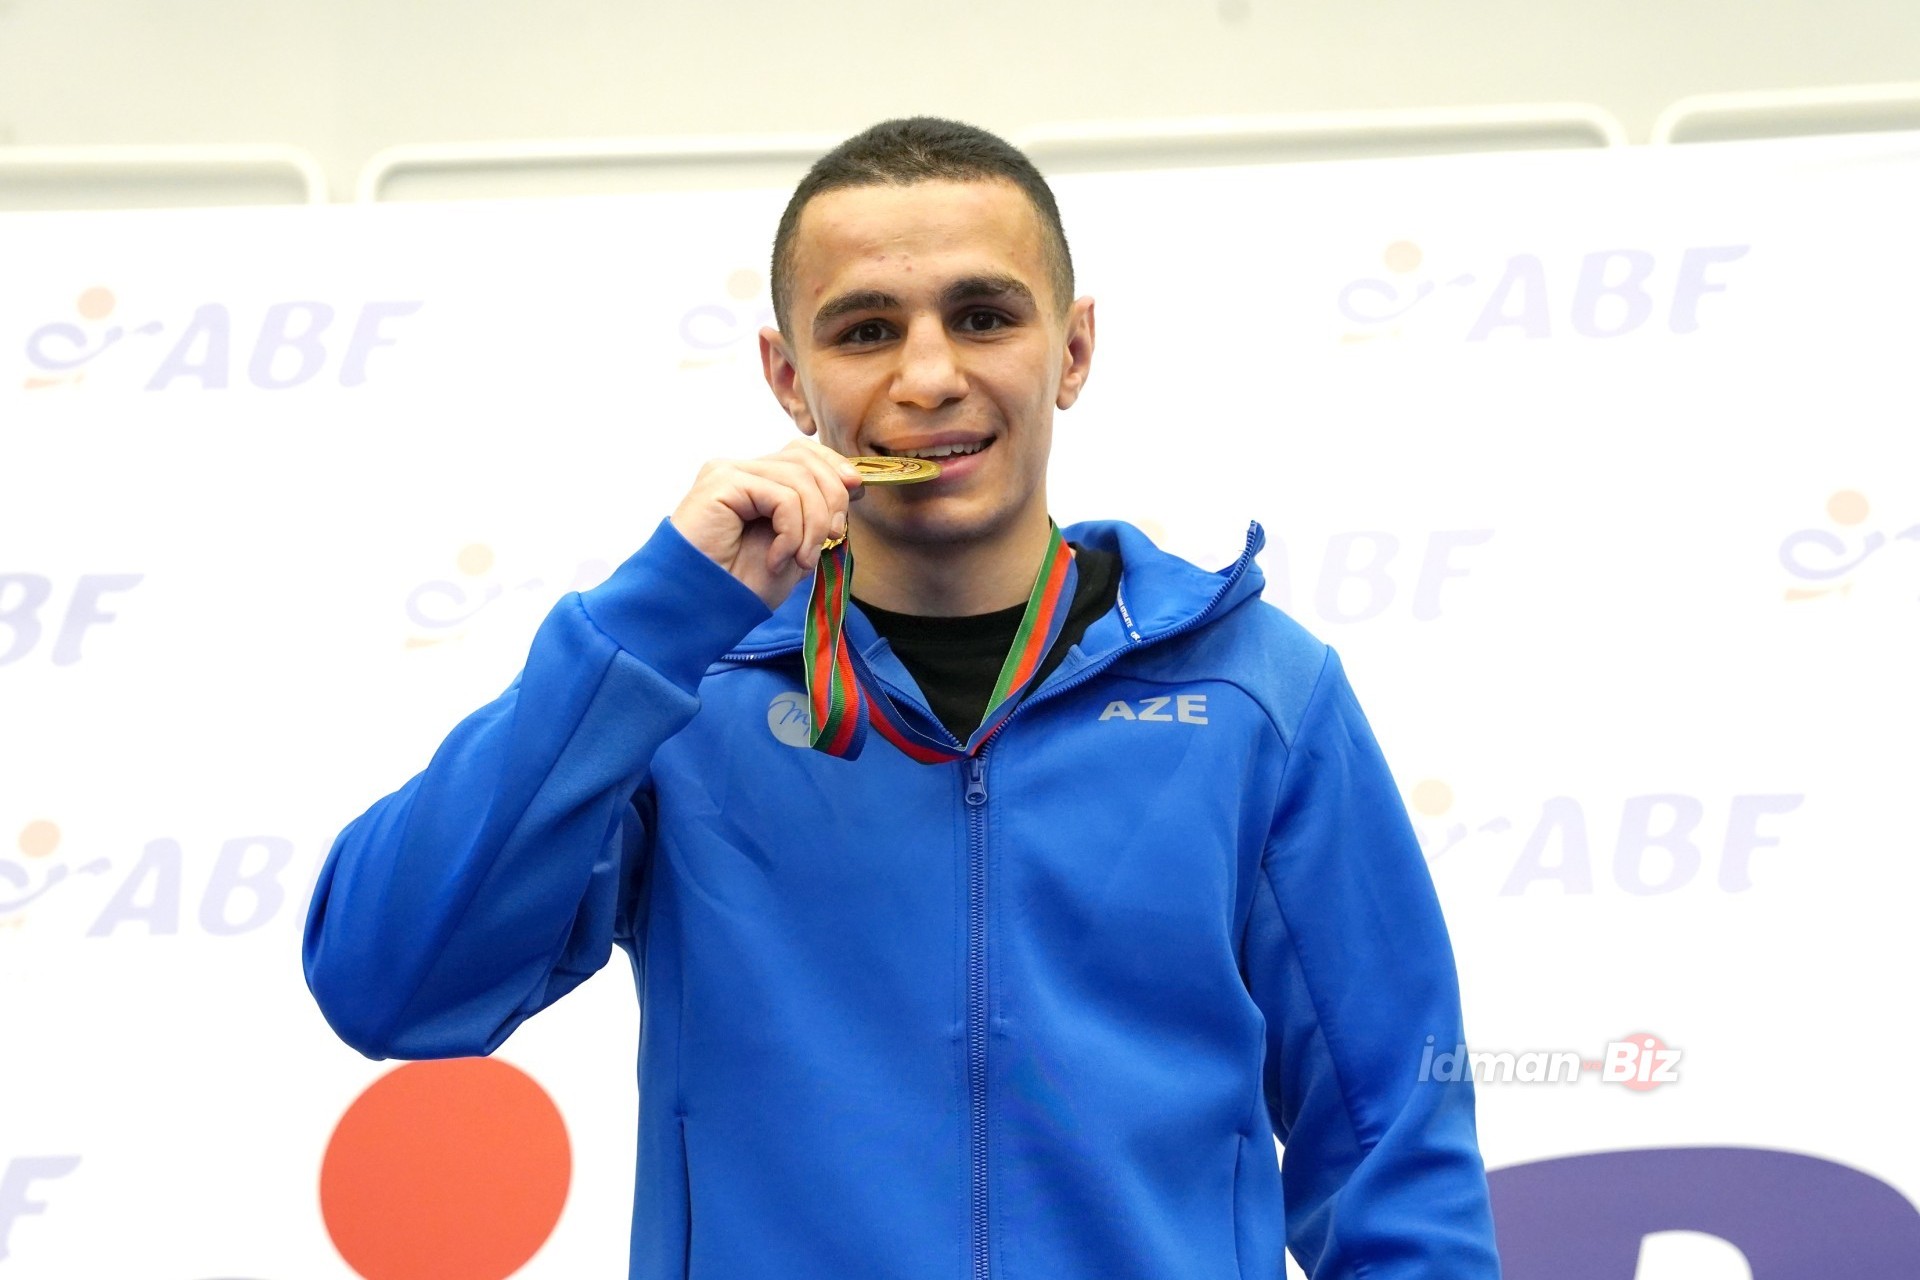 Tayfur Aliyev returns to his old weight at the European Championship: "I am happy" - INTERVIEW